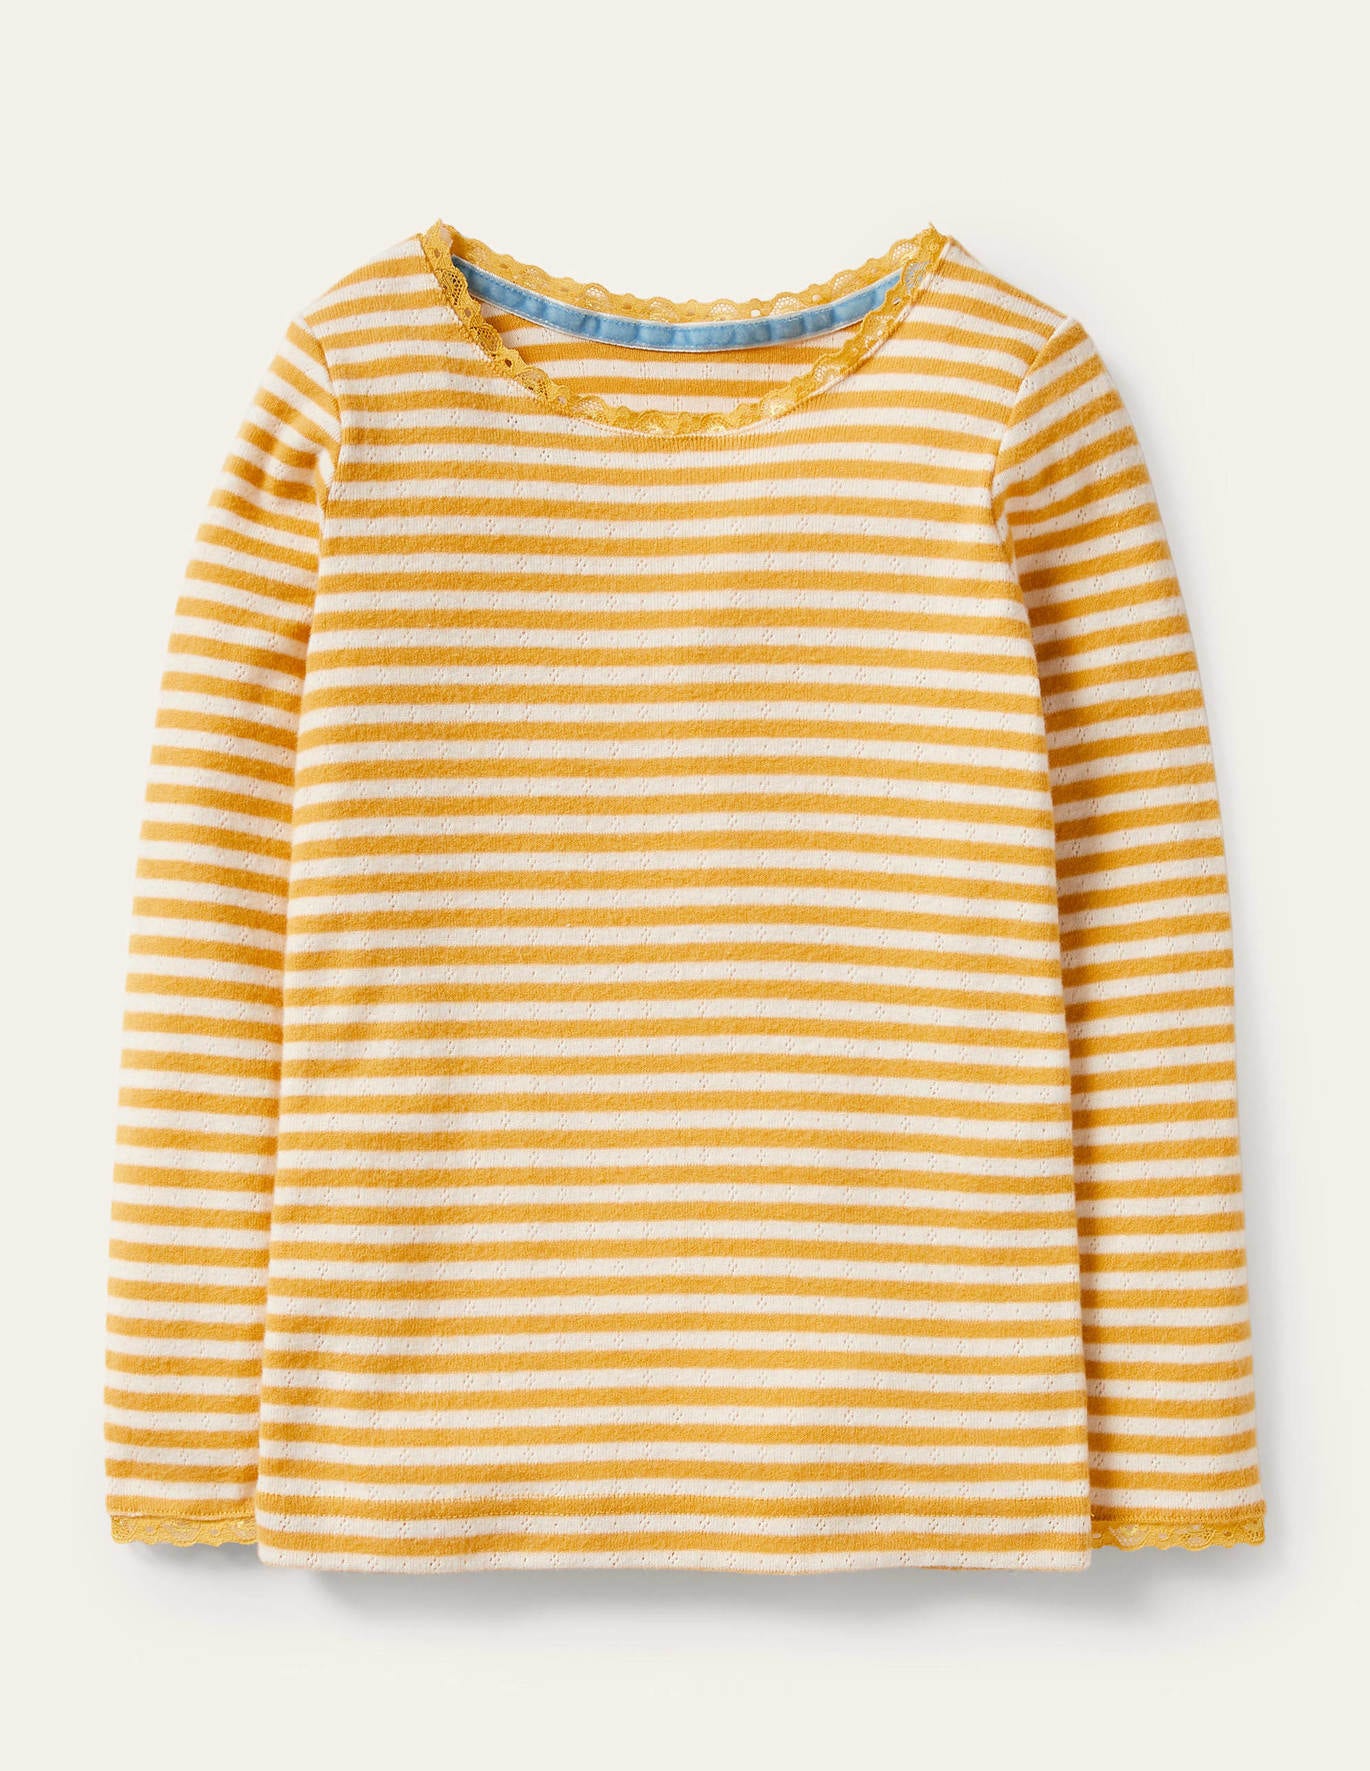 Boden Supersoft Pointelle T-shirt - Honeycomb Yellow/ Ivory